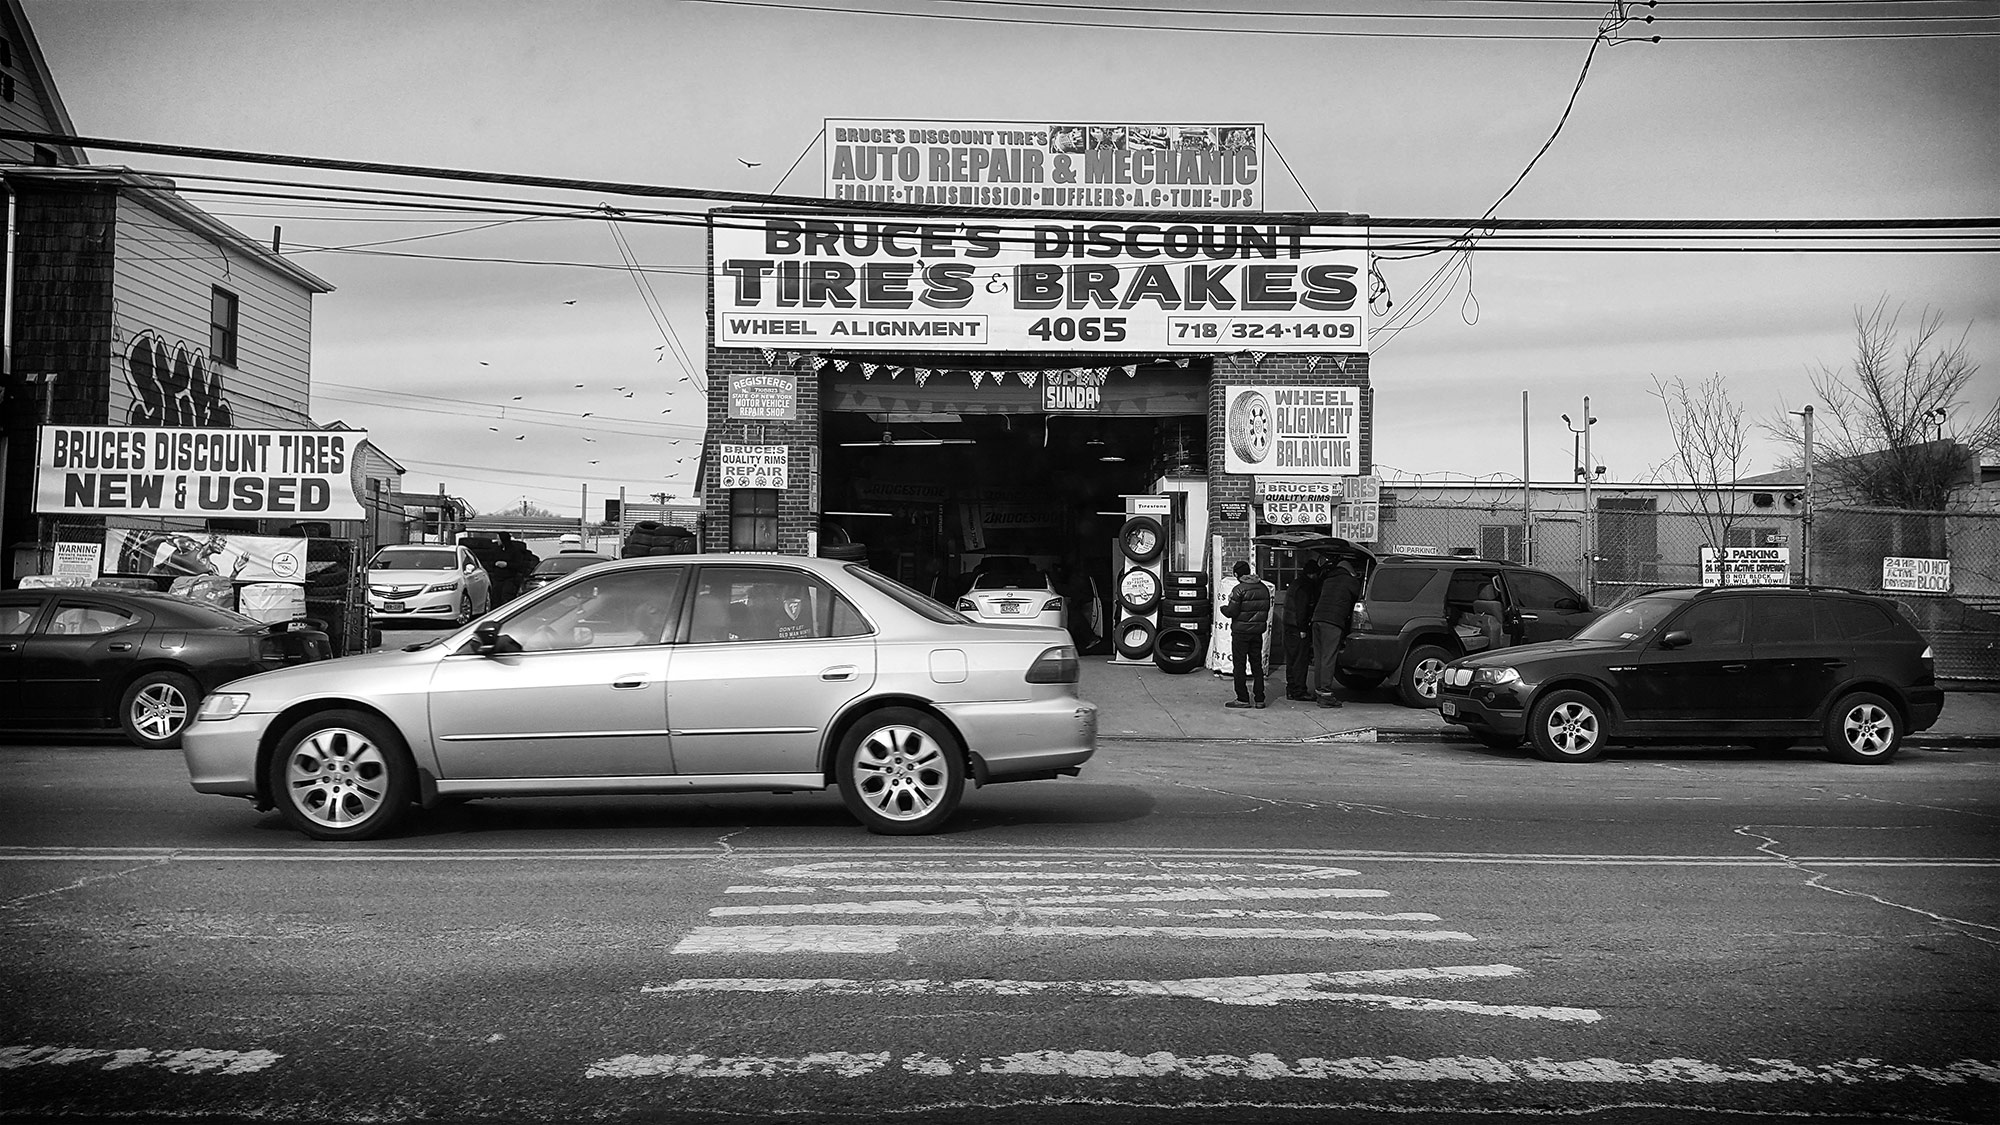   Used tires, the Bronx ©2017 by bret wills